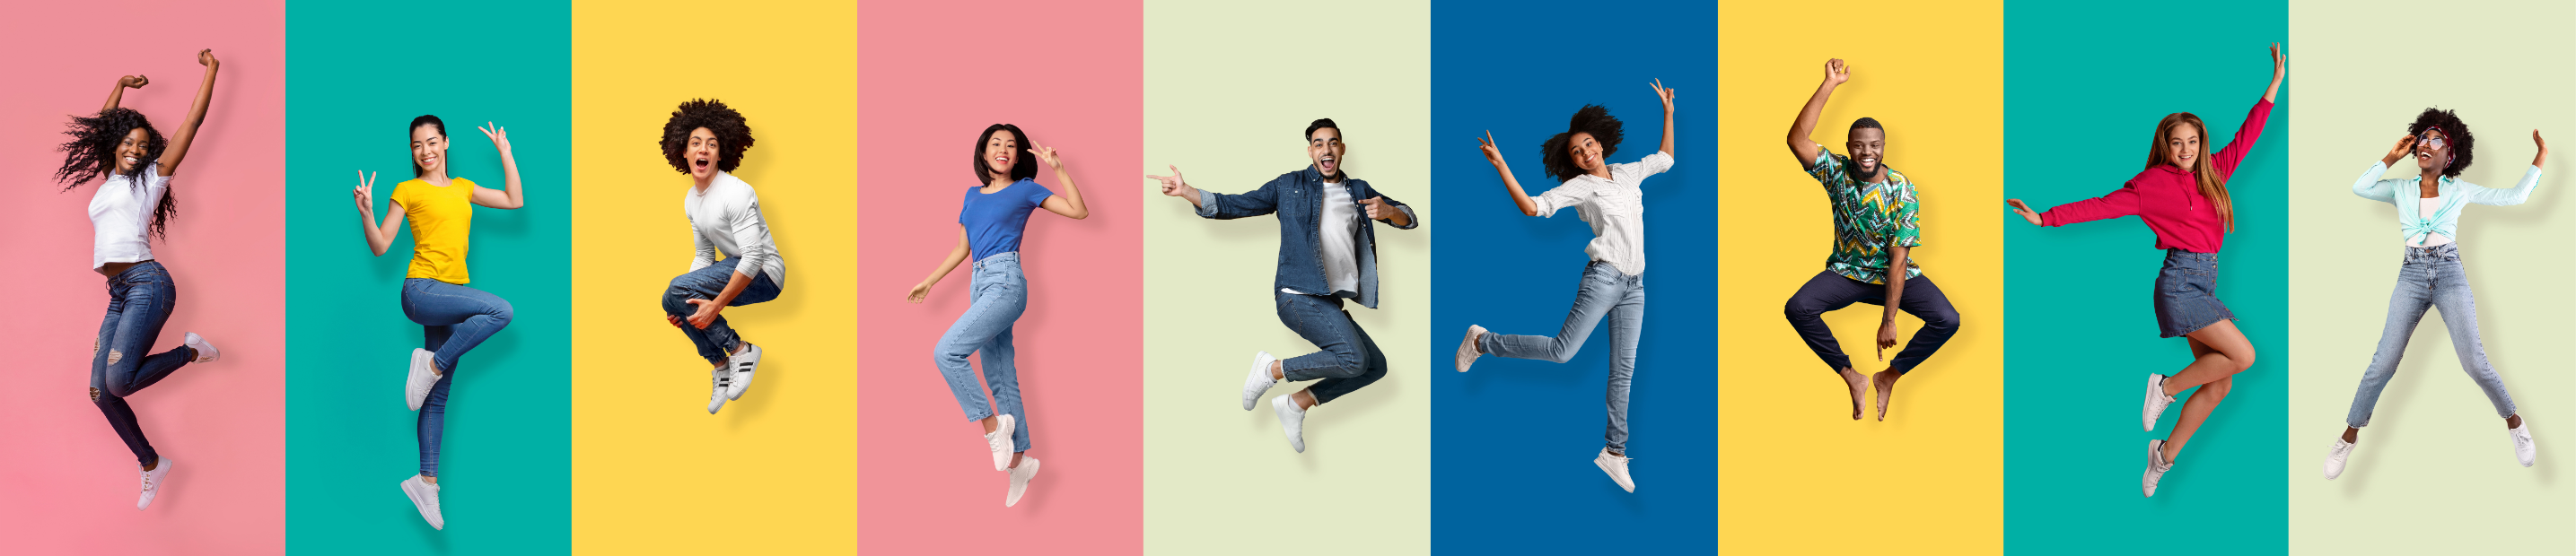 Collage of different young adults in various joyful poses